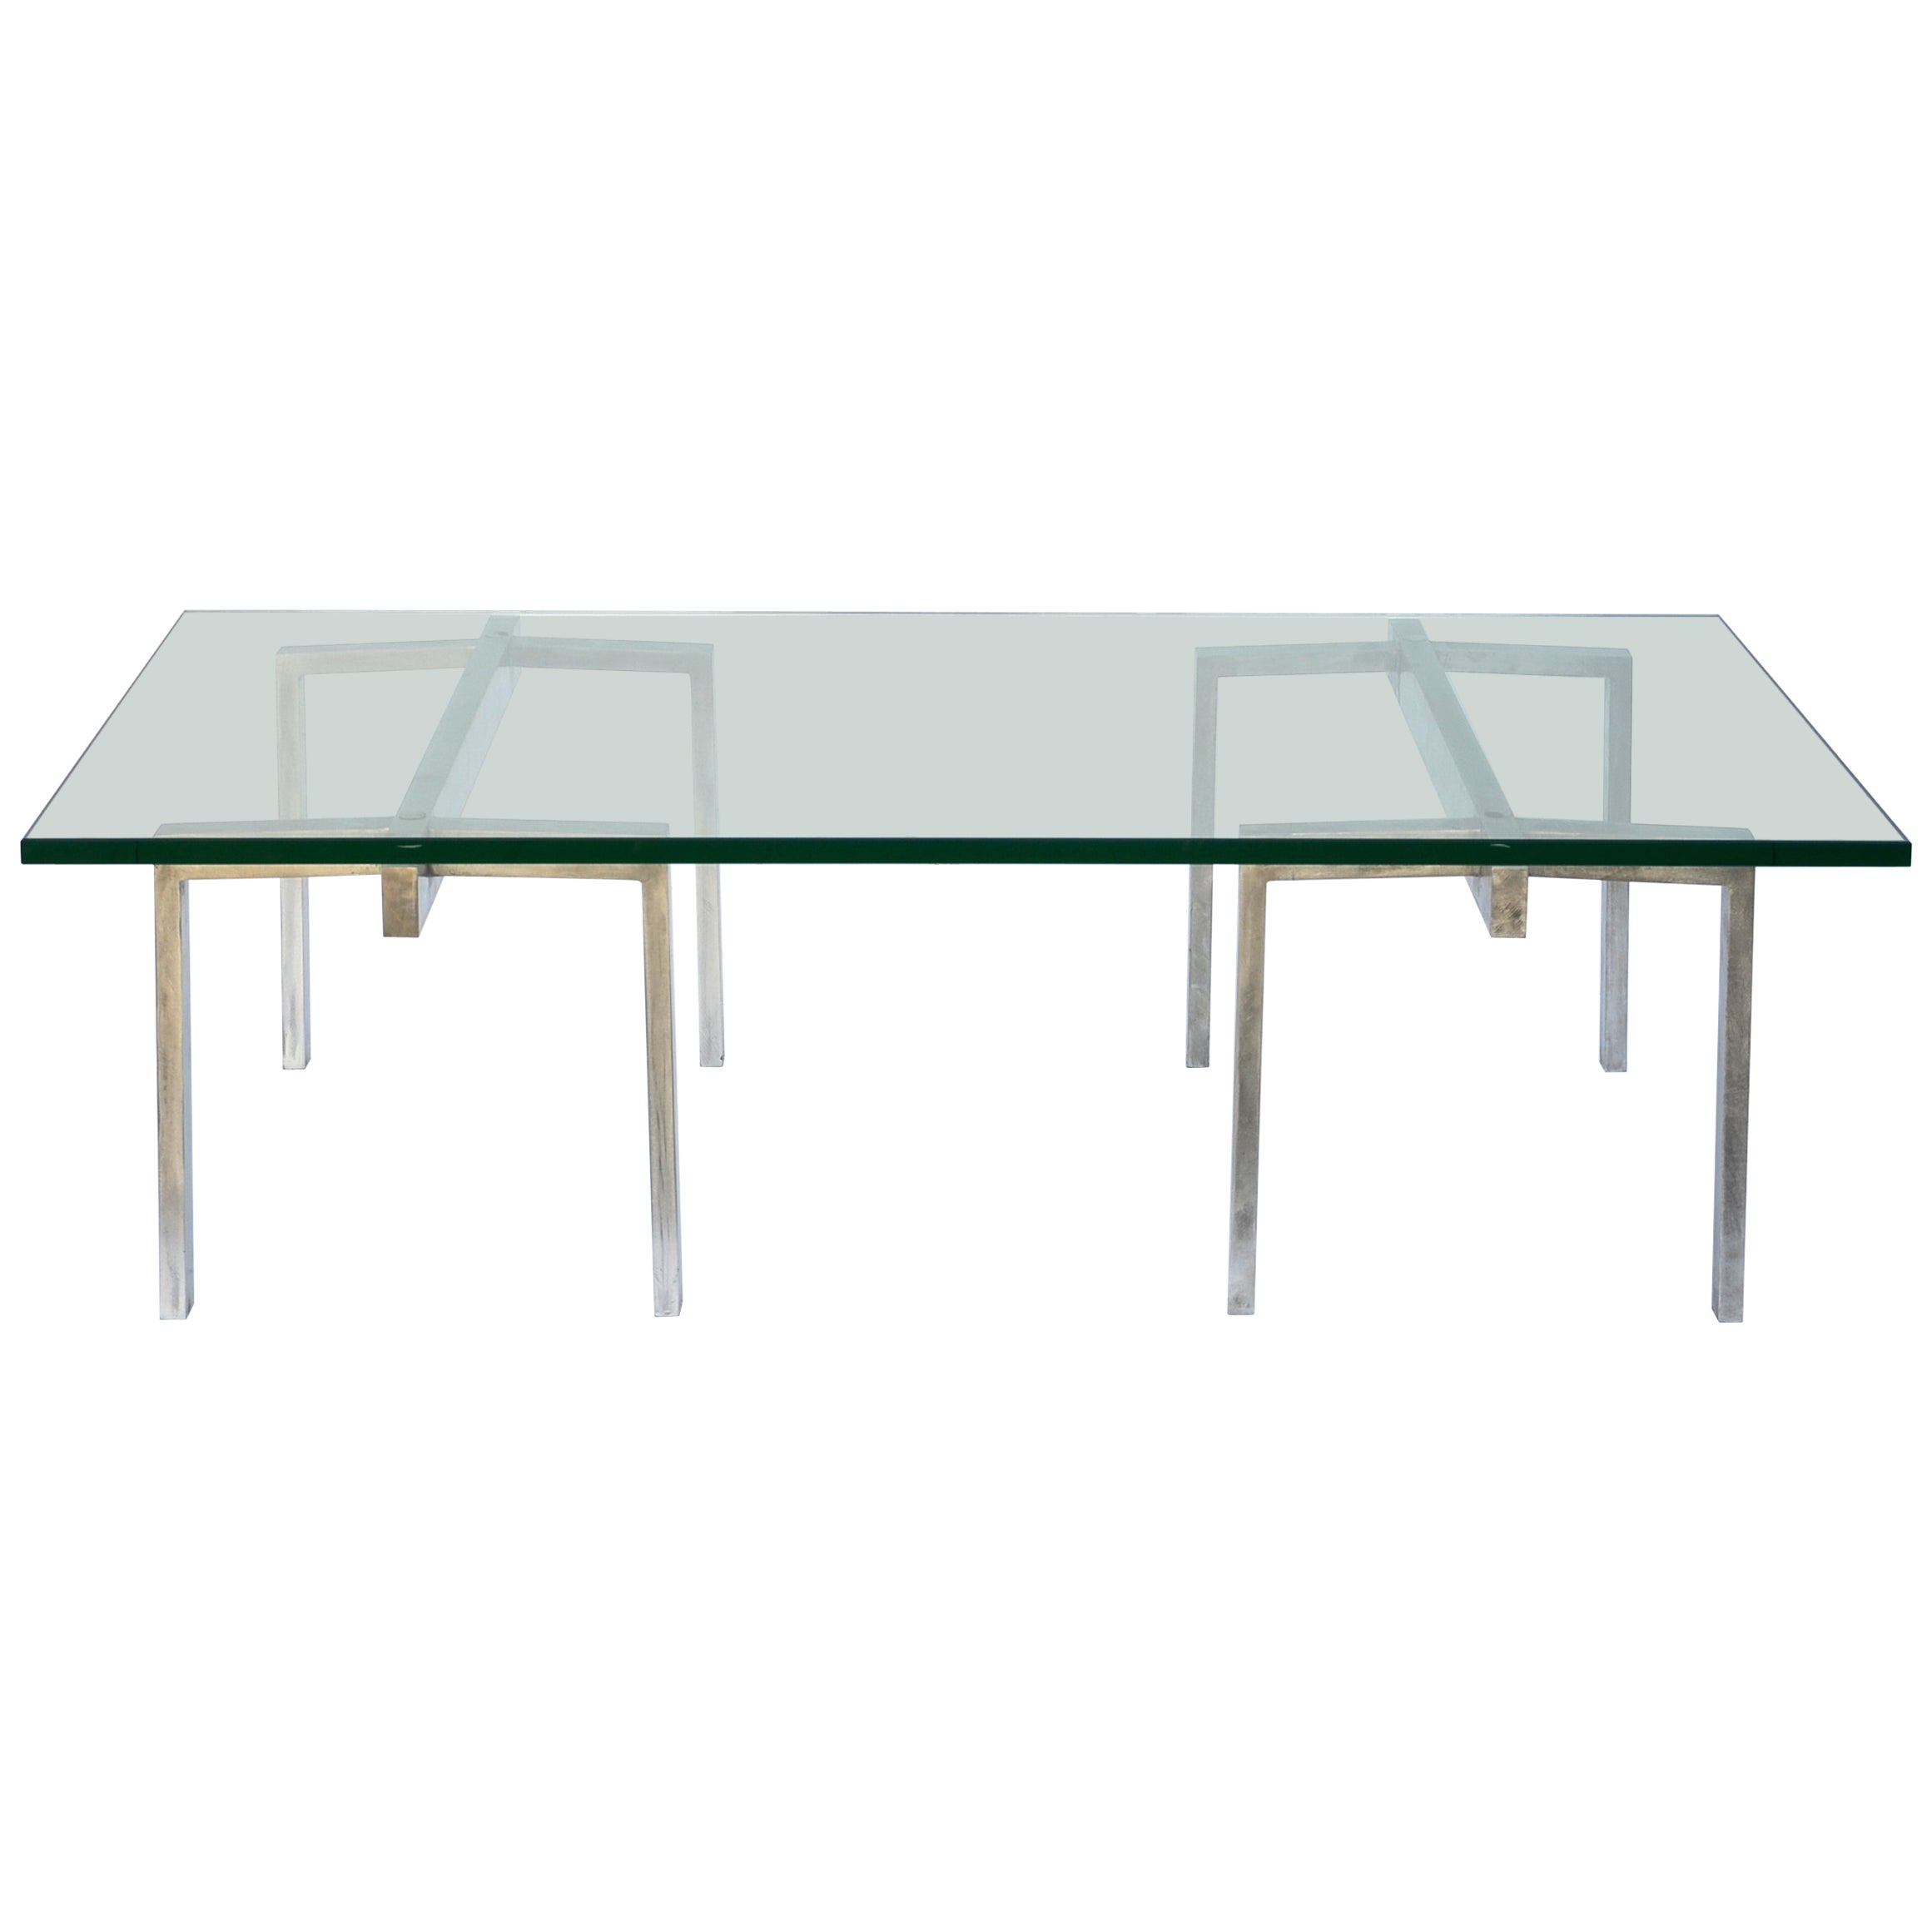 'Treteaux' Coffee Table by Design Frères For Sale